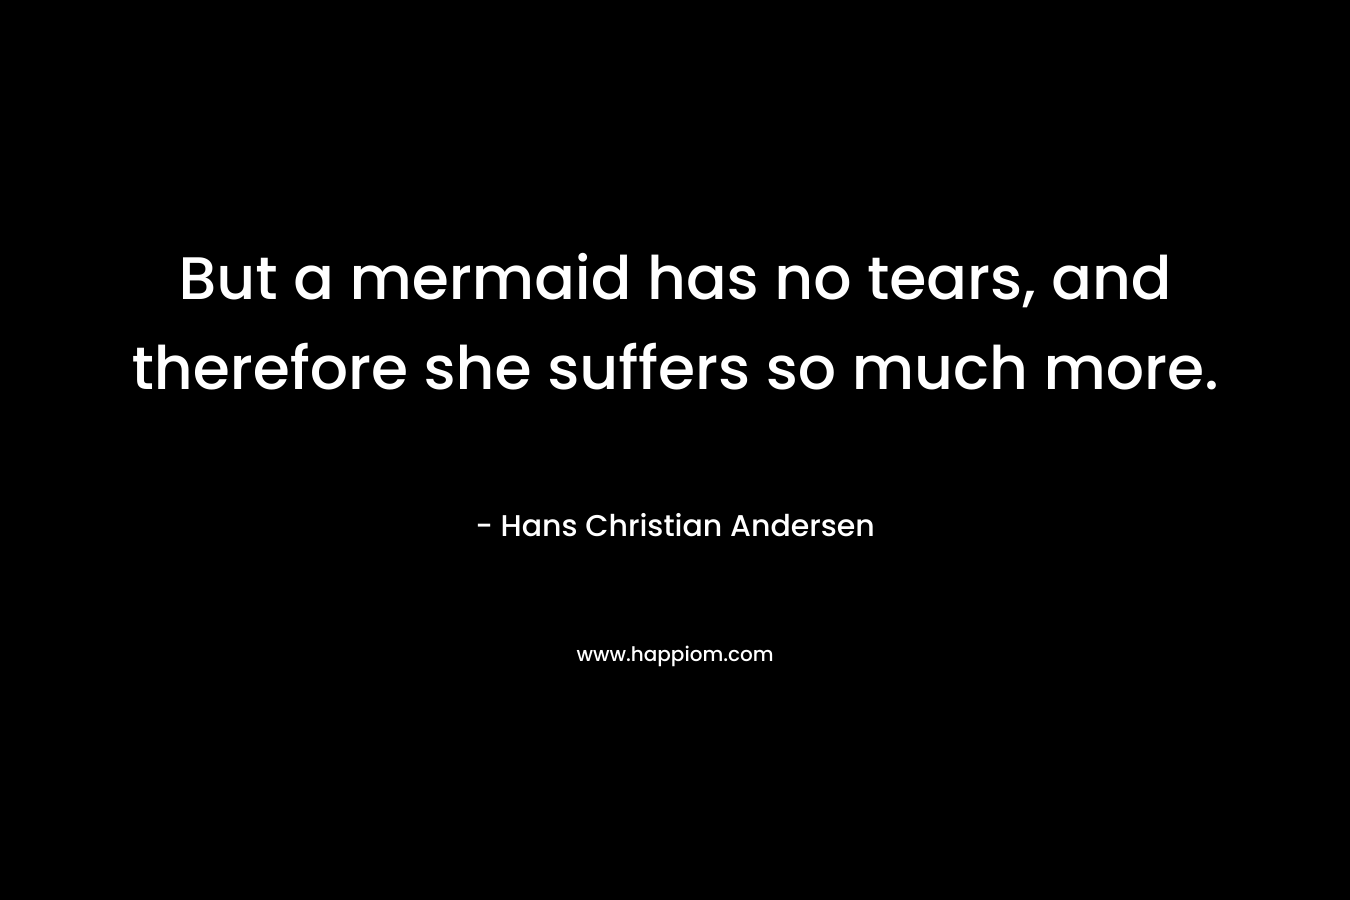 But a mermaid has no tears, and therefore she suffers so much more. – Hans Christian Andersen